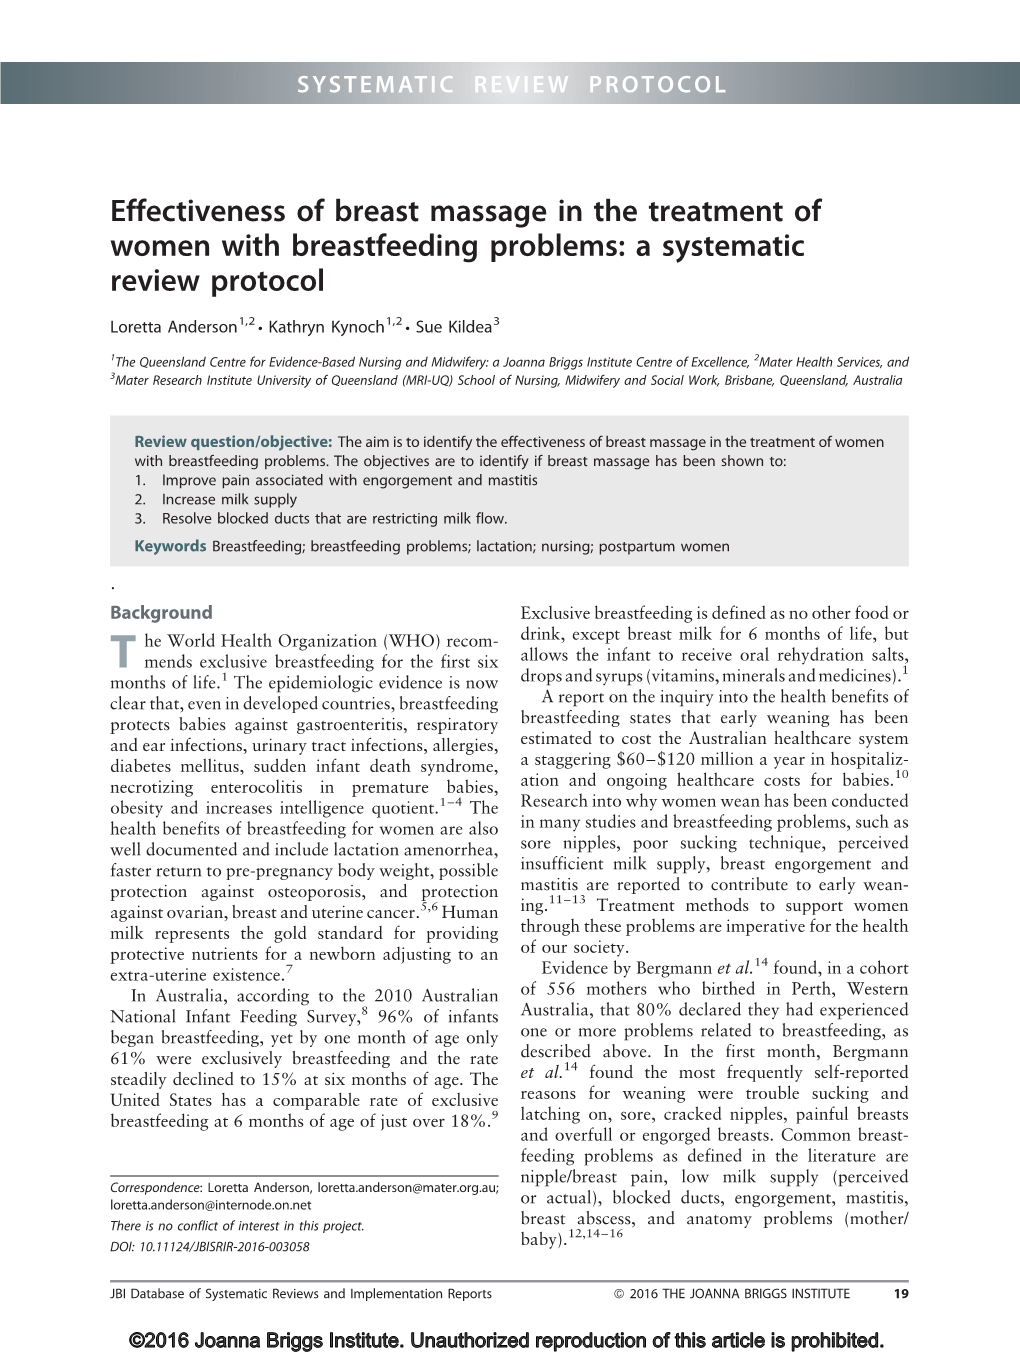 Effectiveness of Breast Massage in the Treatment of Women with Breastfeeding Problems: a Systematic Review Protocol